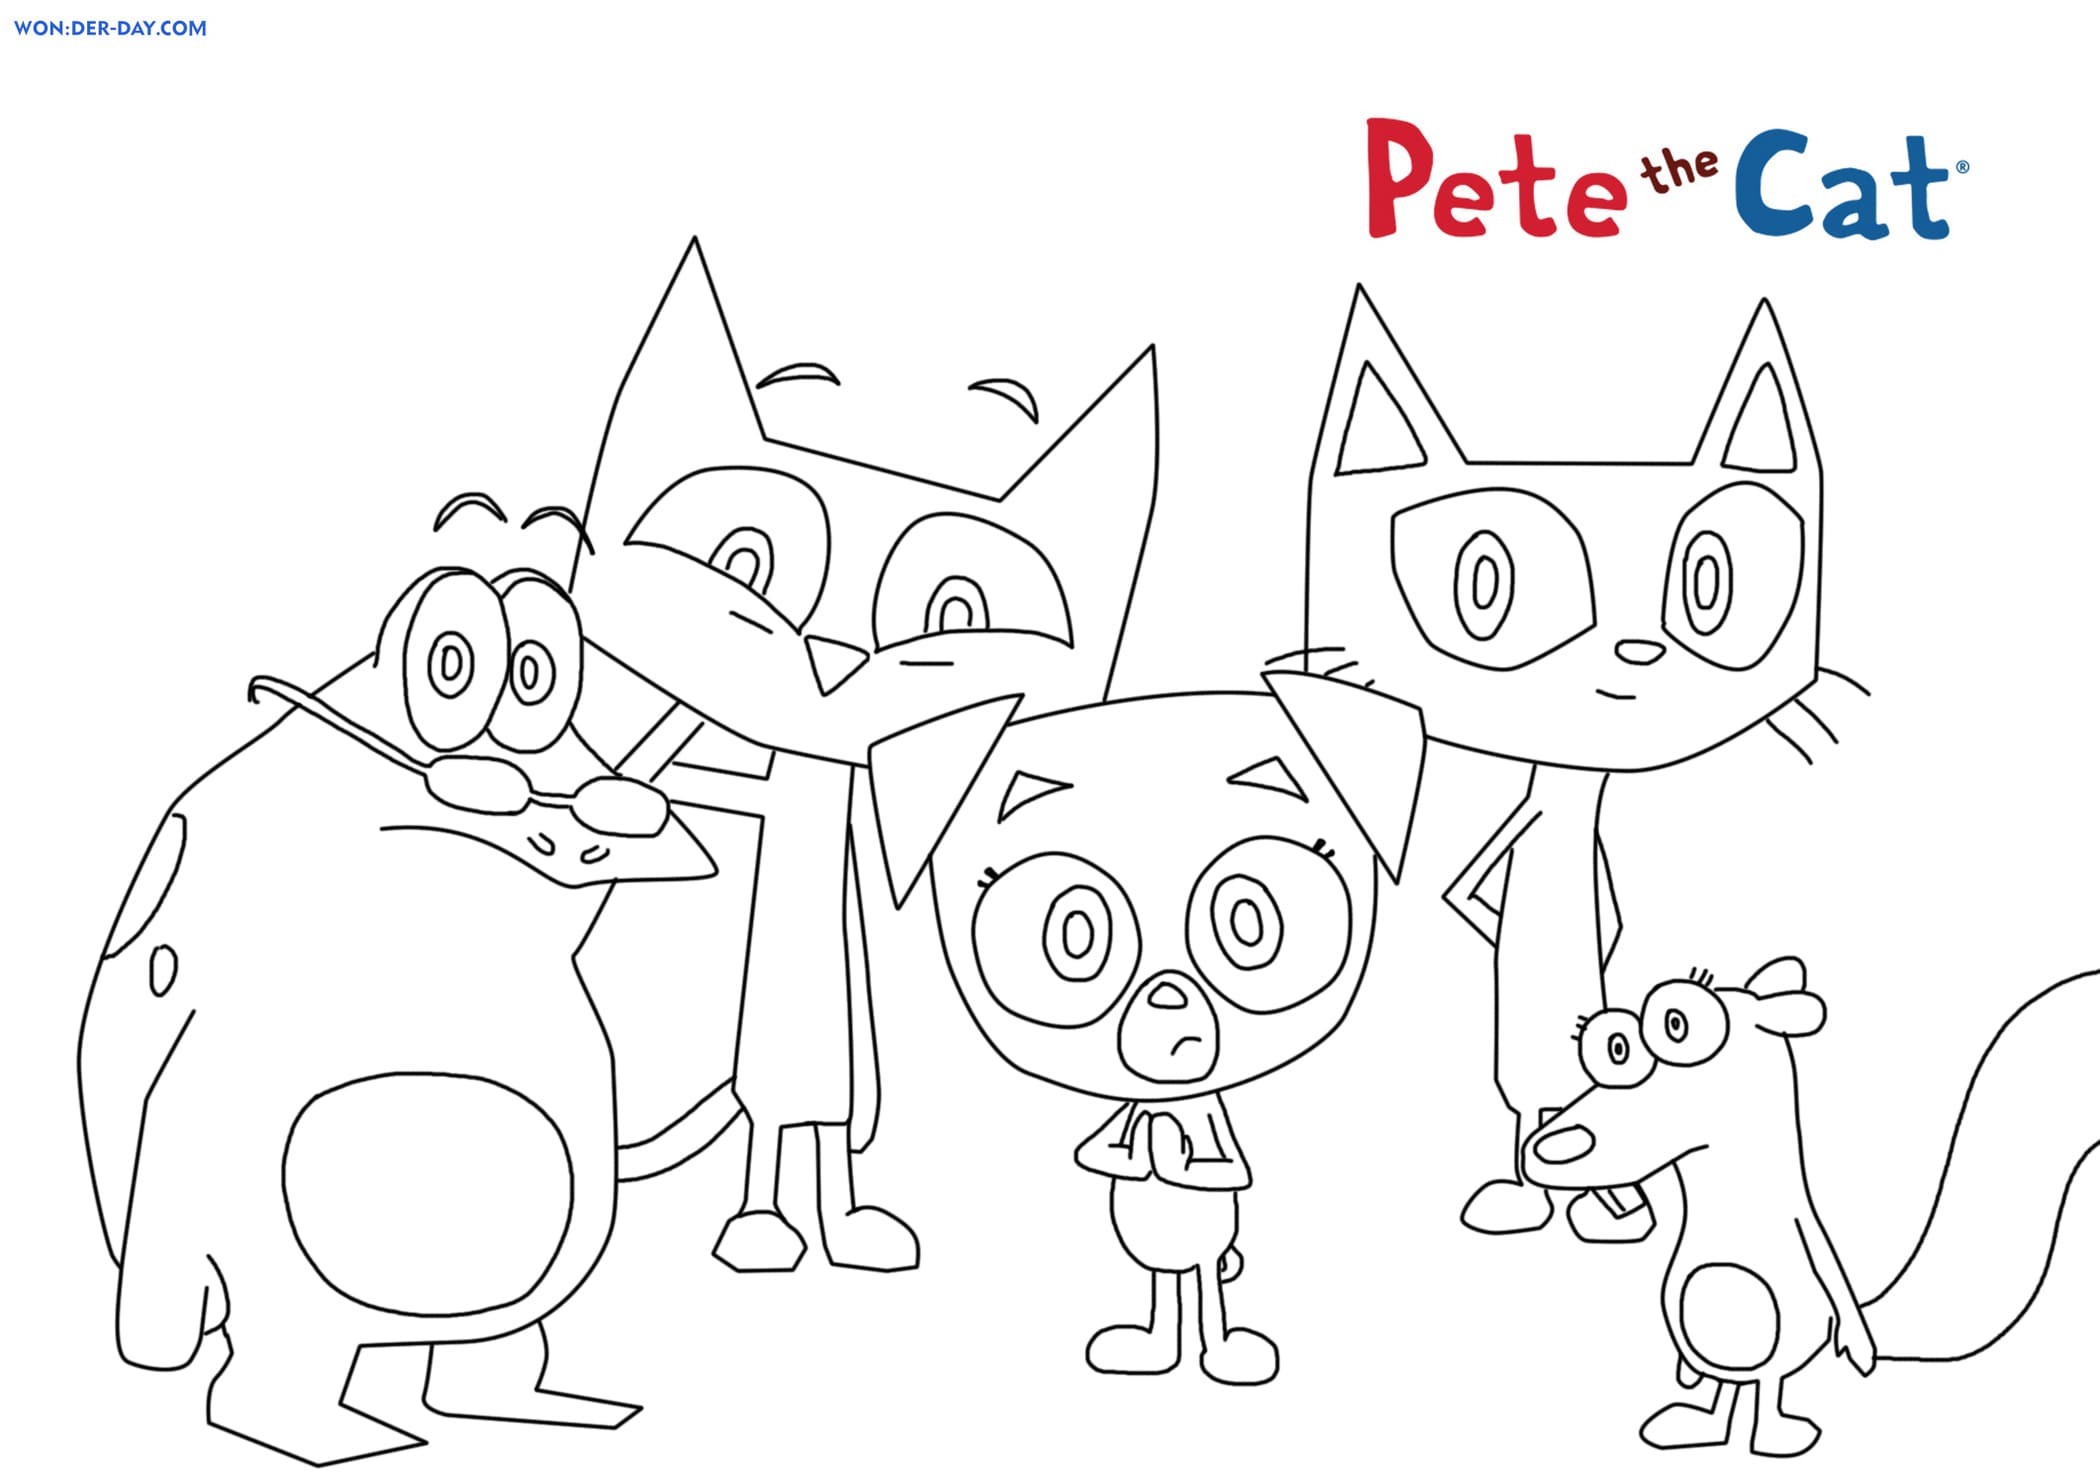 pete-the-cat-coloring-page-printable